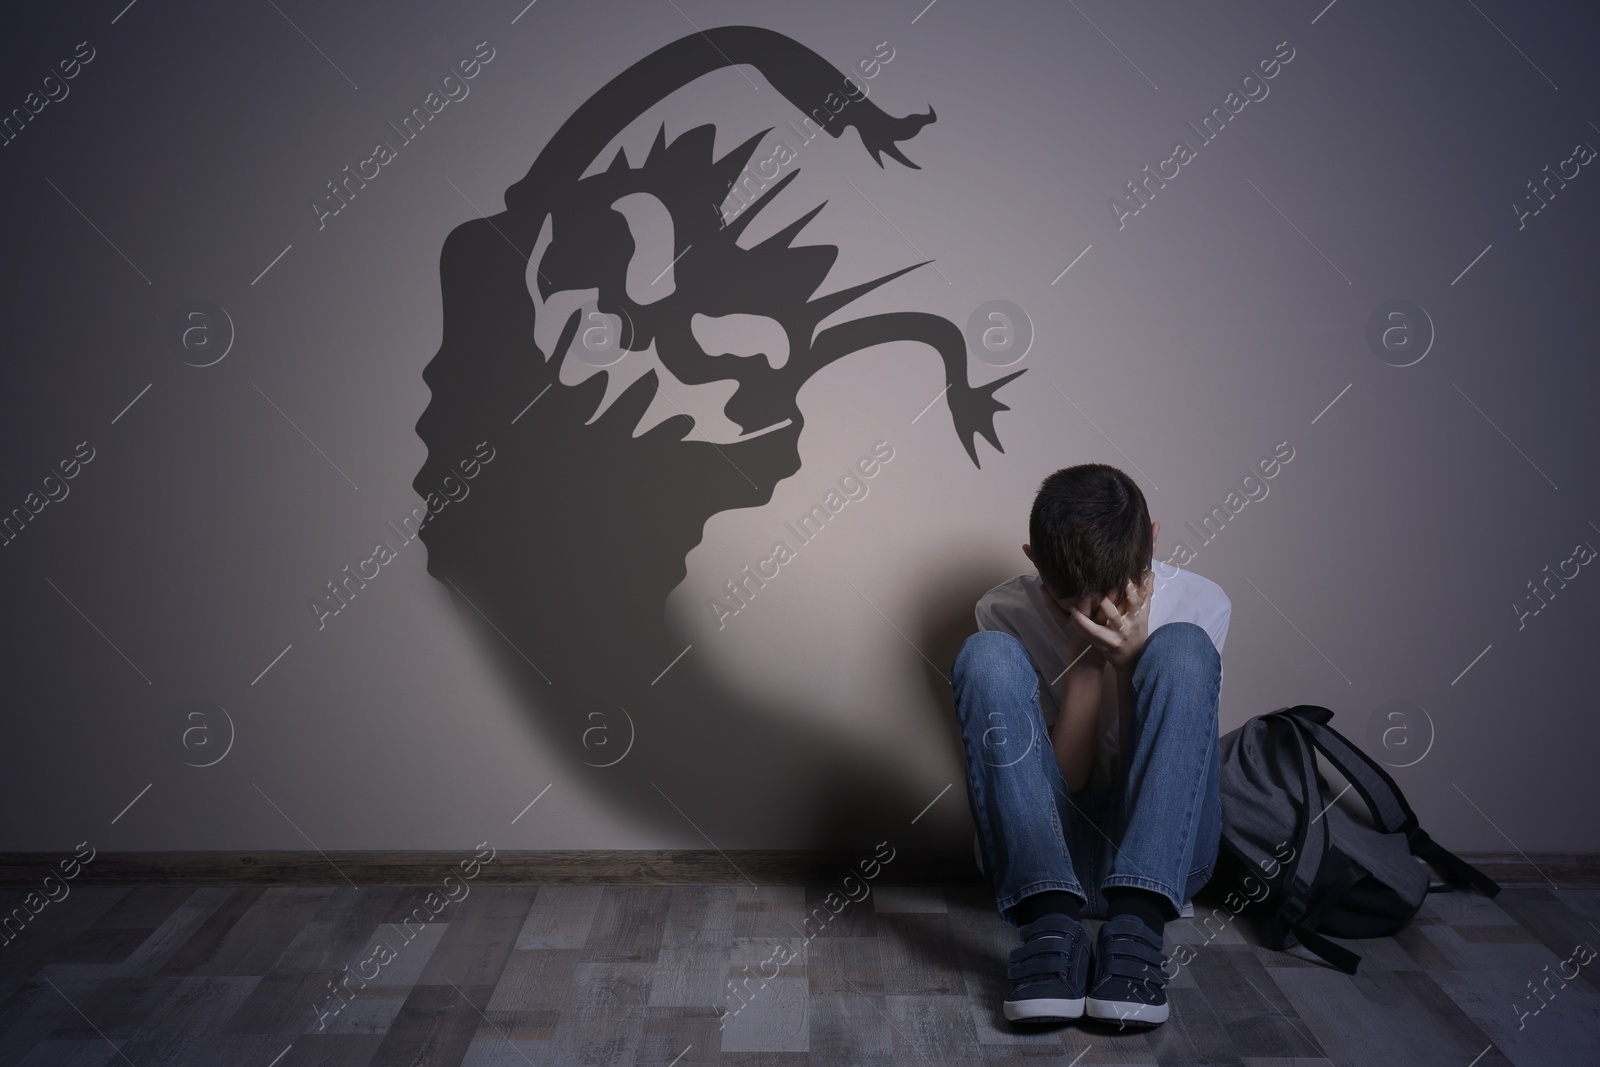 Image of Shadow of monster on wall and scared boy in room